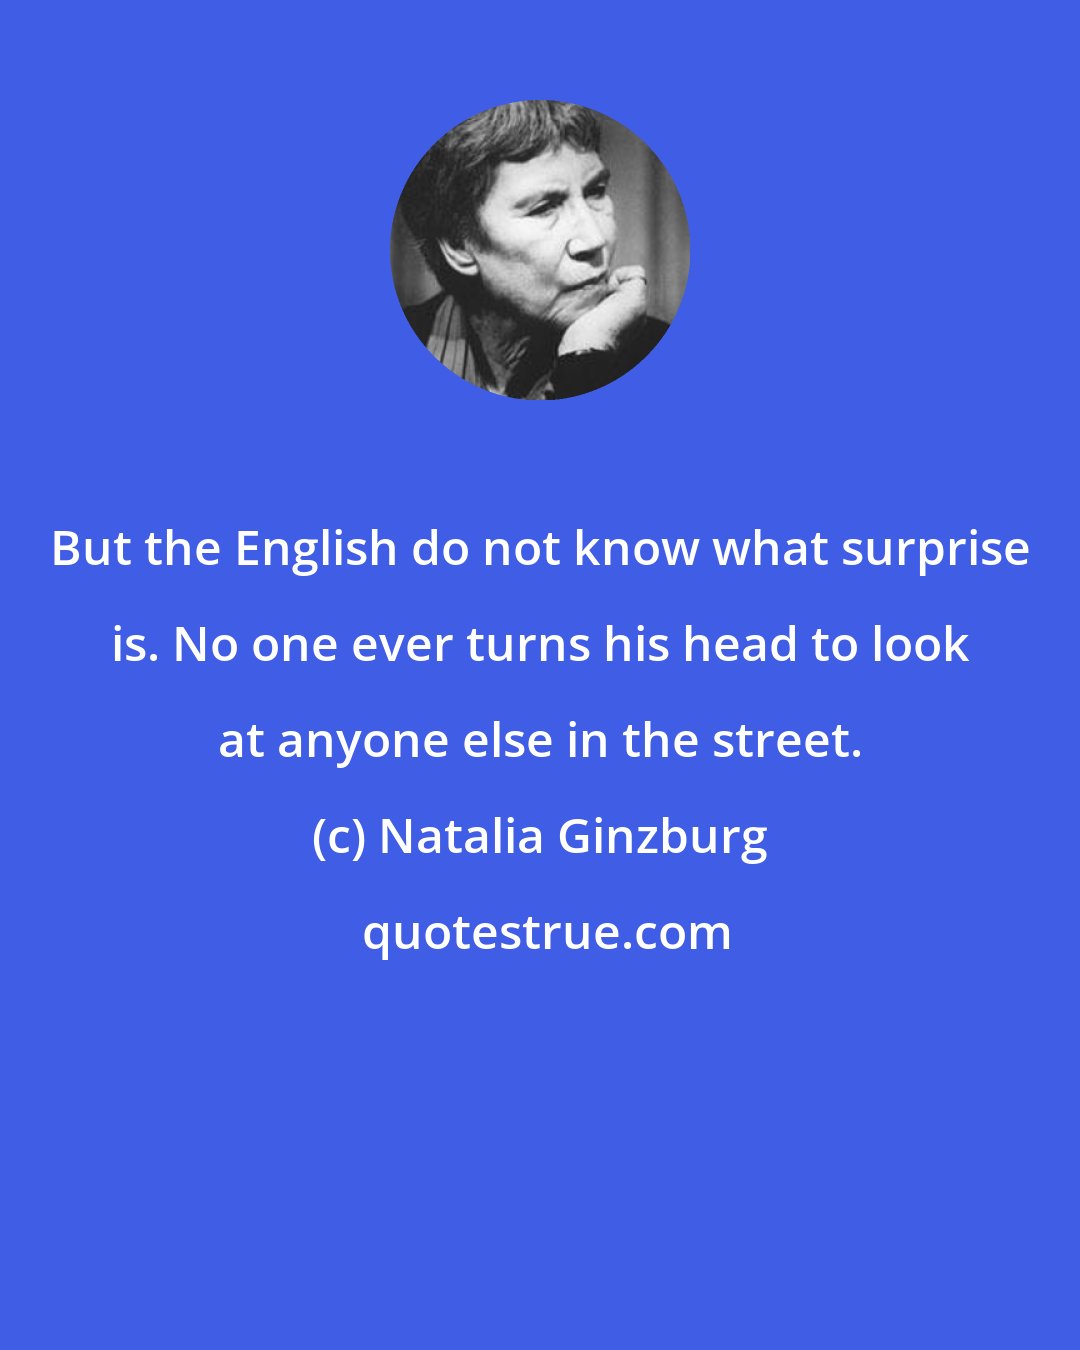 Natalia Ginzburg: But the English do not know what surprise is. No one ever turns his head to look at anyone else in the street.